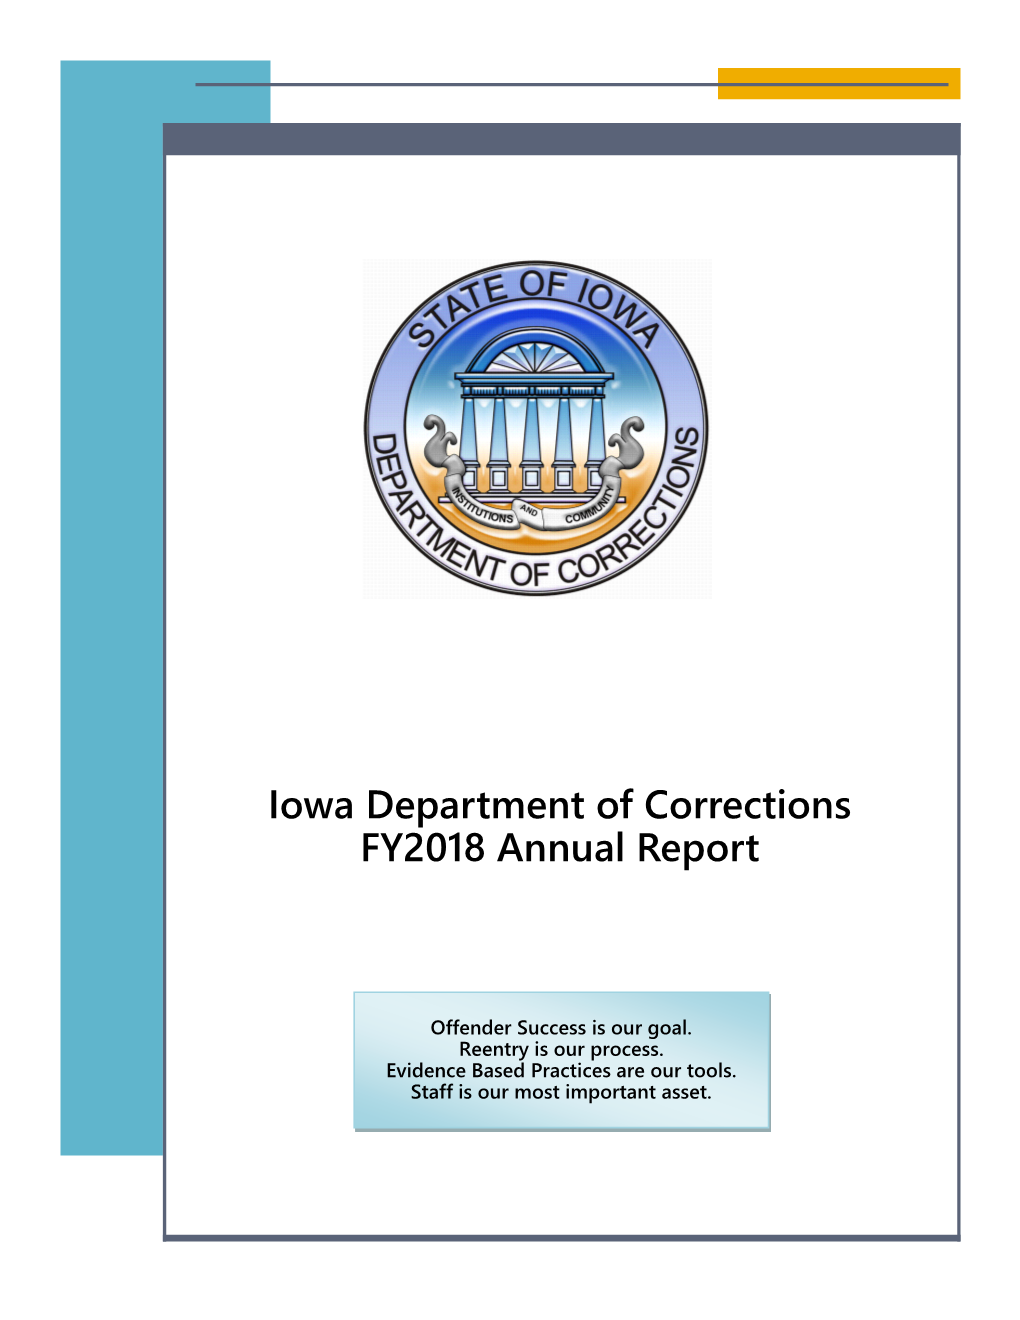 Iowa Department of Corrections FY2018 Annual Report